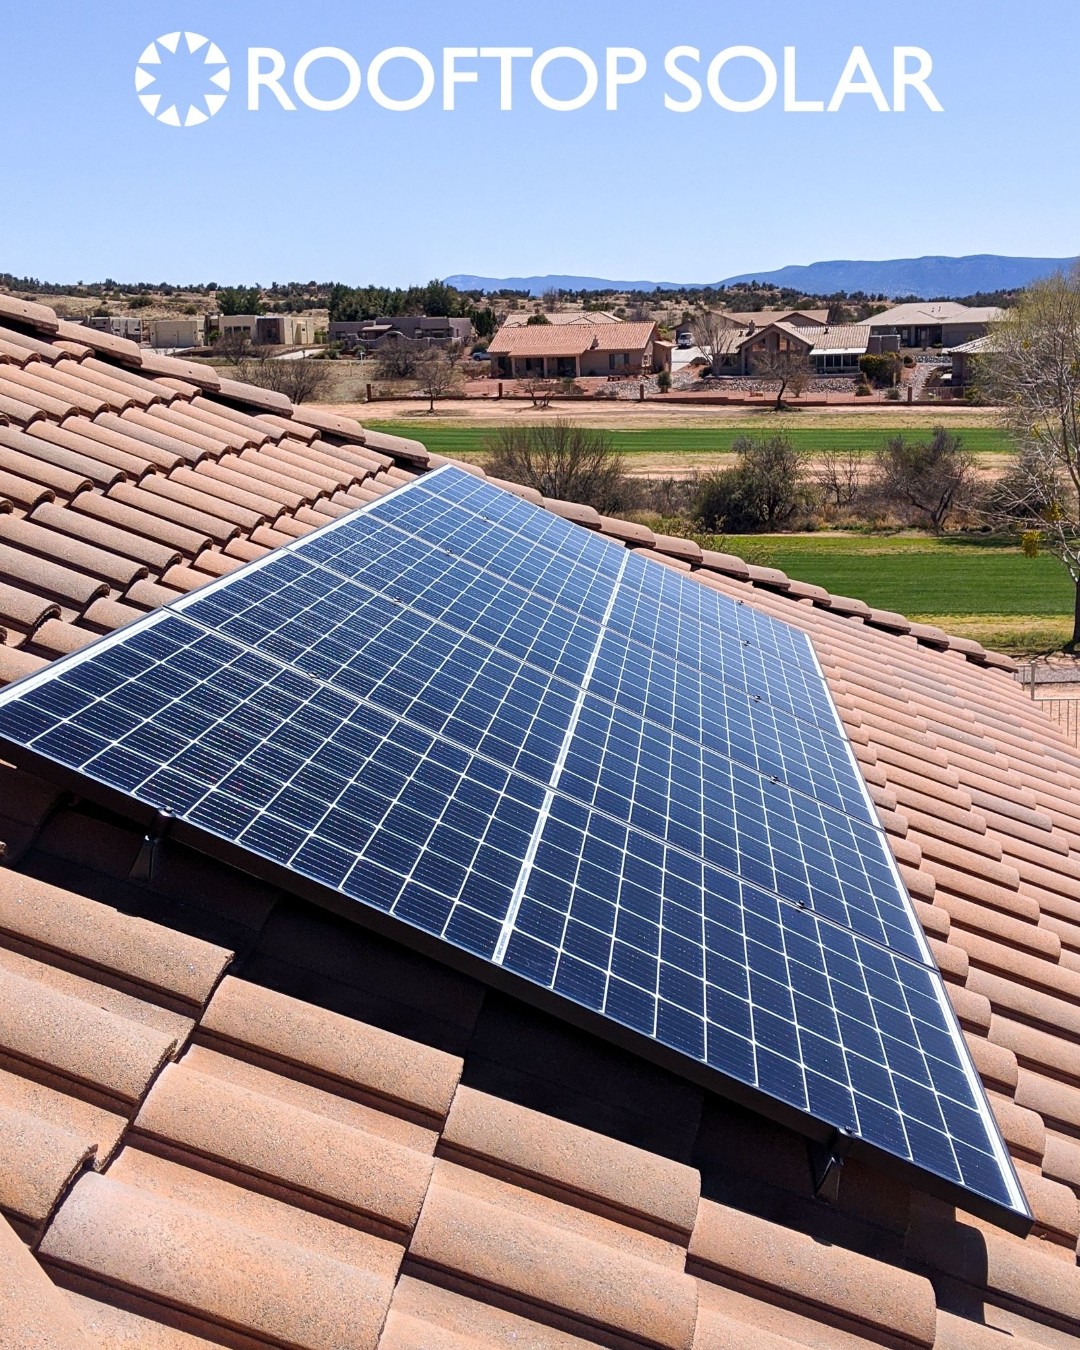 Rooftop Solar supplied photo